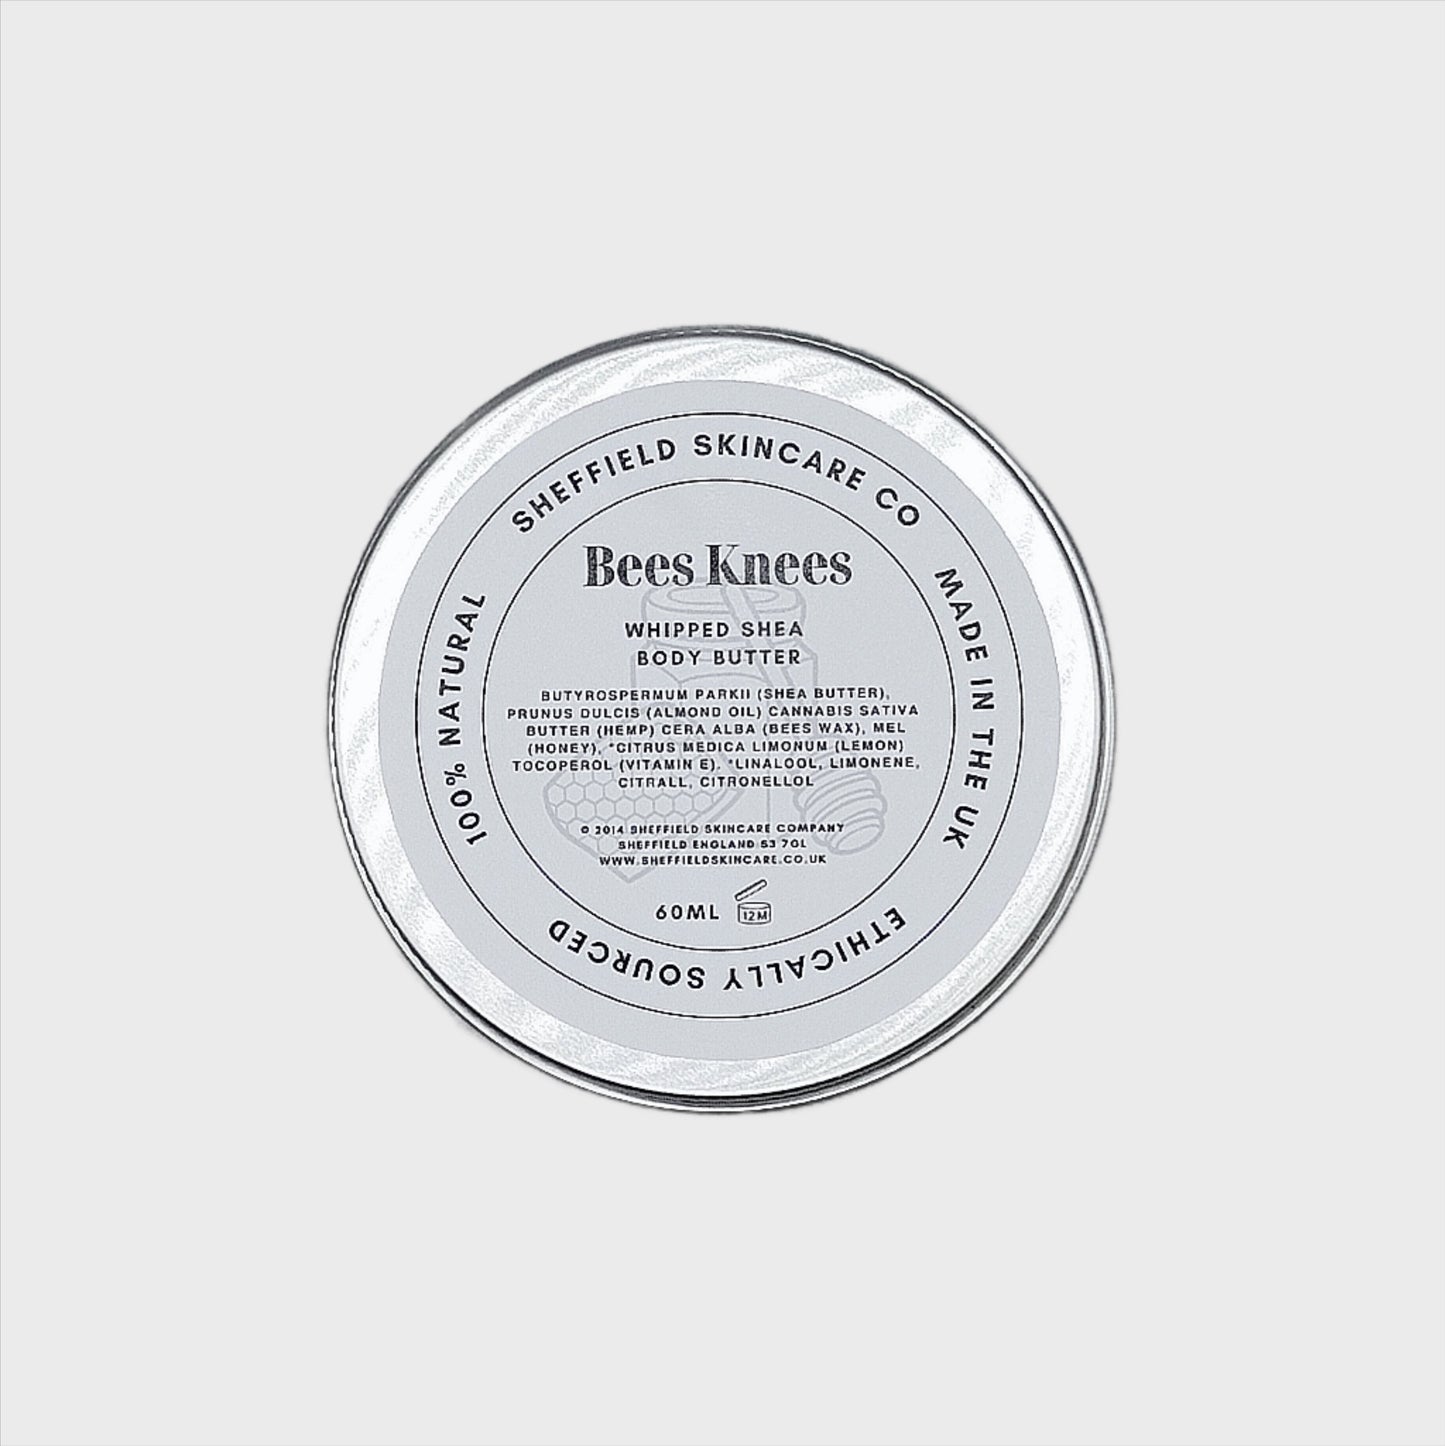 Bees Knees Body Butter